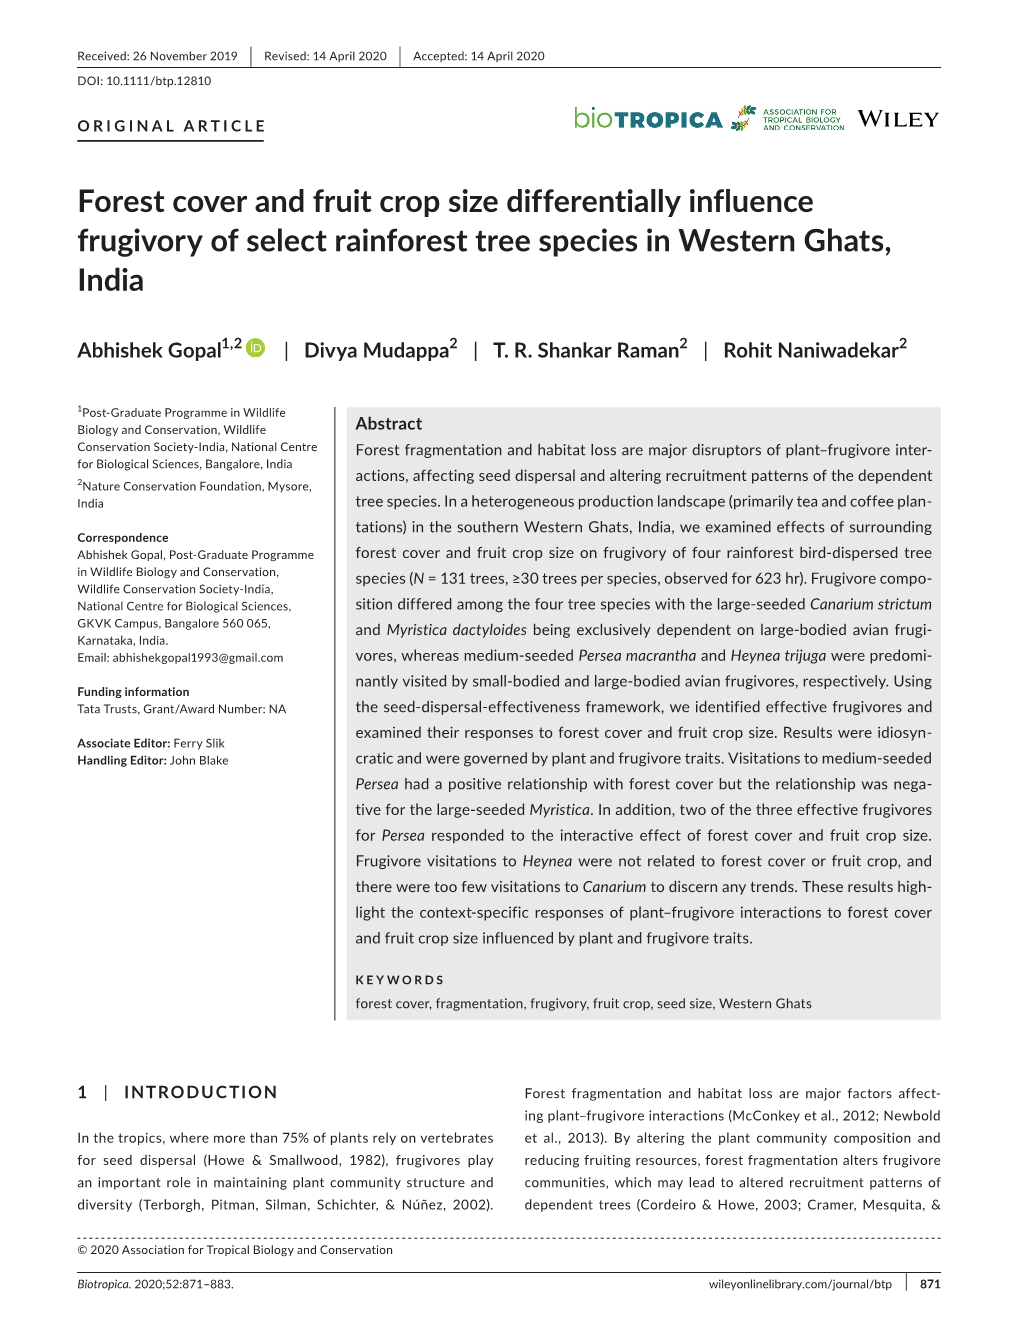 Forest Cover and Fruit Crop Size Differentially Influence Frugivory of Select Rainforest Tree Species in Western Ghats, India